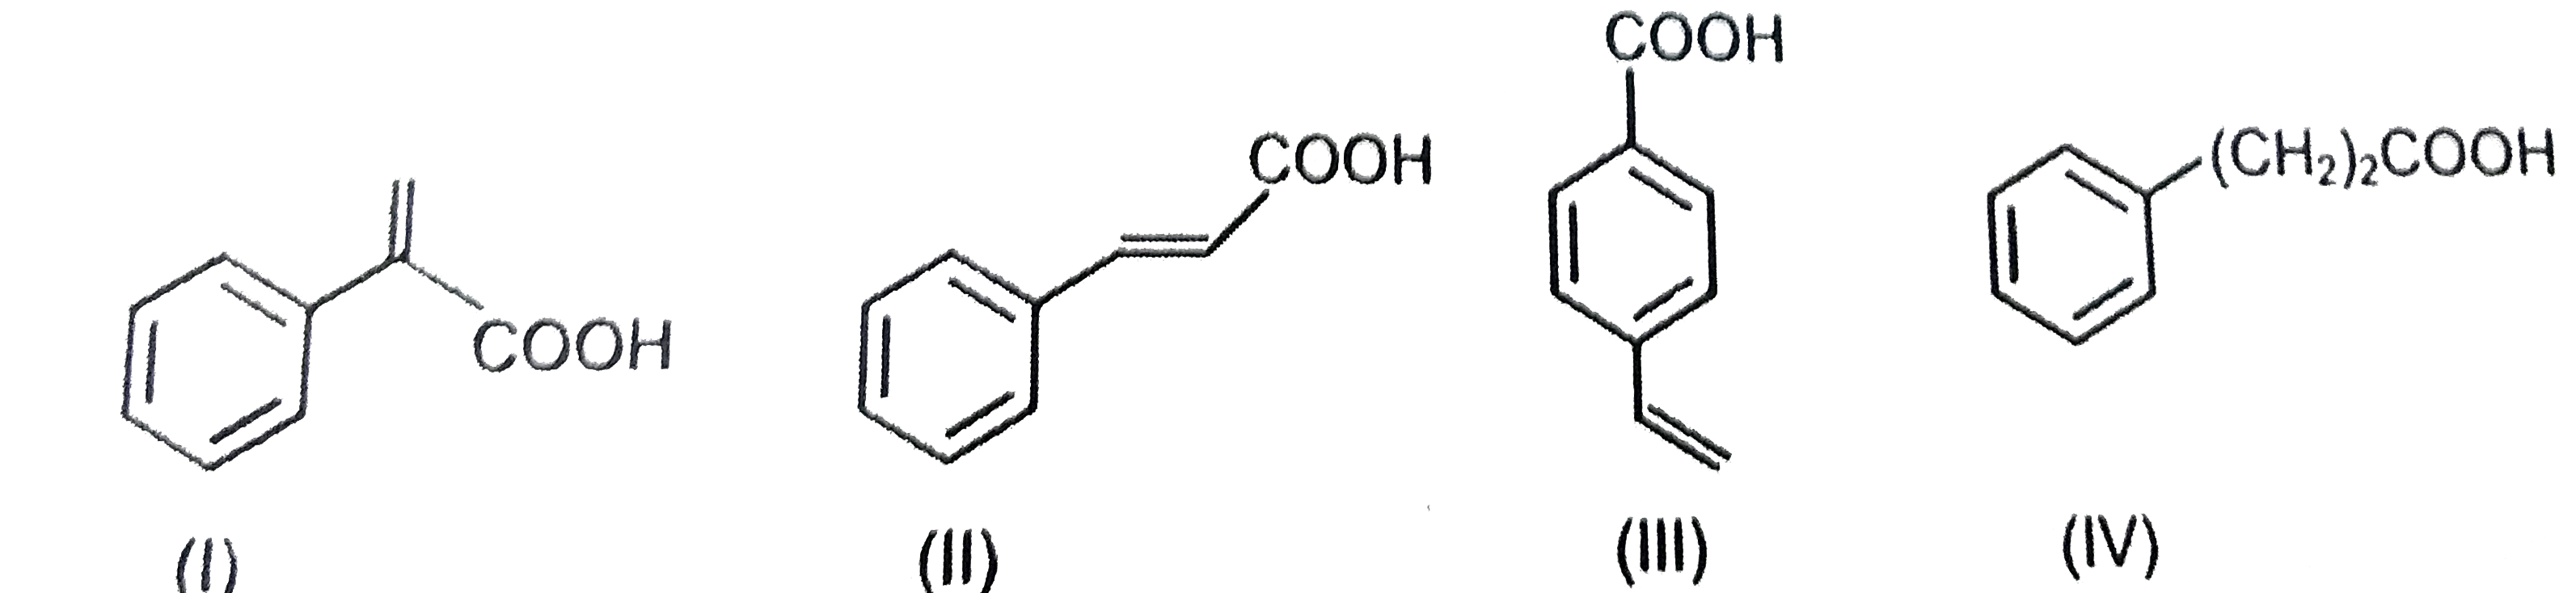 An organic compound 'P' with molecular formula C(9)H(8)O(2) on oxidation gives benzoic acid as one of the products. The possible structure/s 'P' is/are